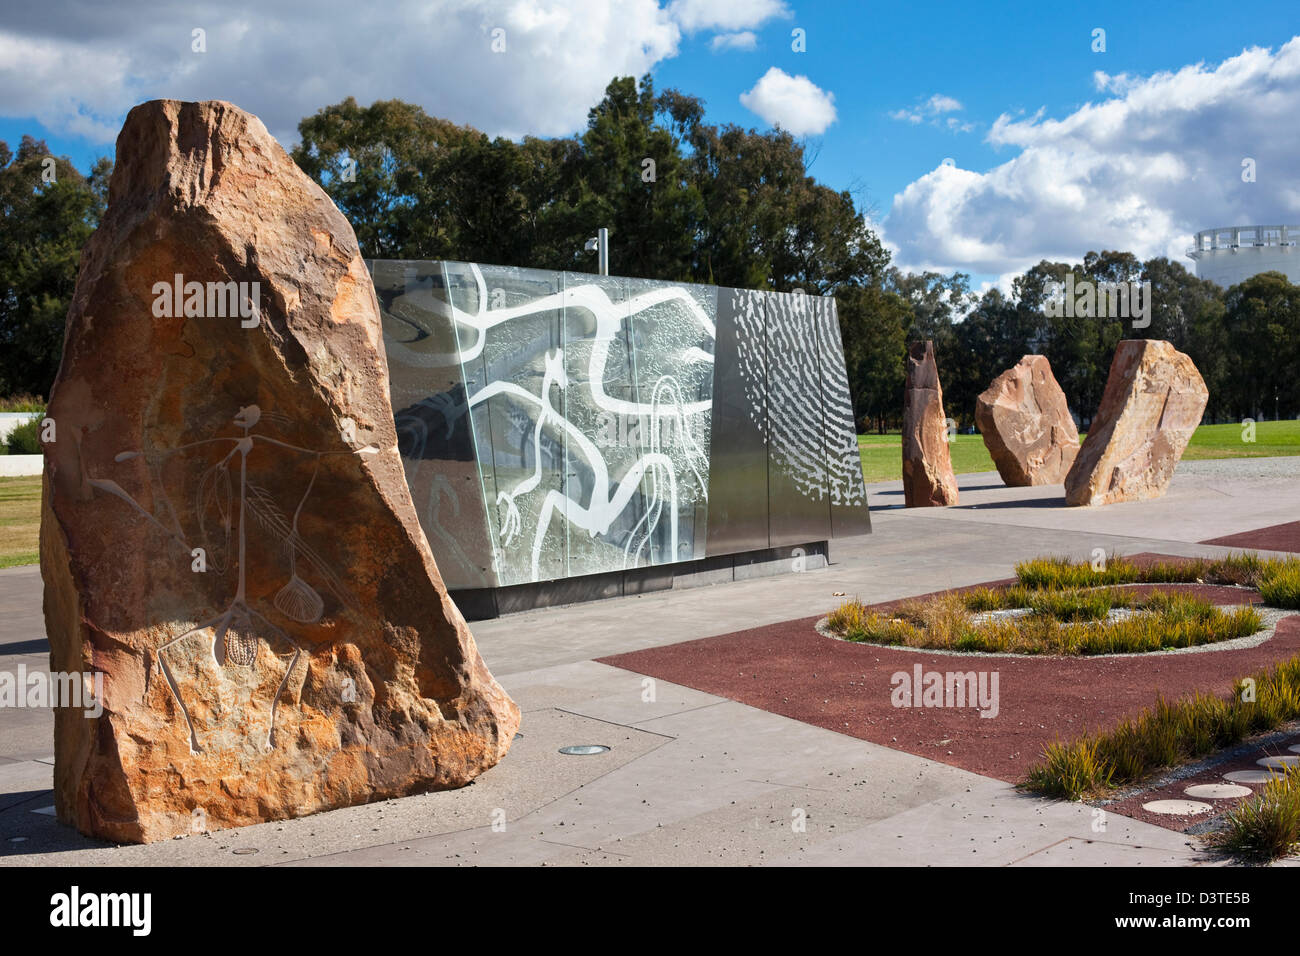 Indigenous artwork at Reconciliation Place. Canberra, Australian Capital Territory (ACT), Australia Stock Photo